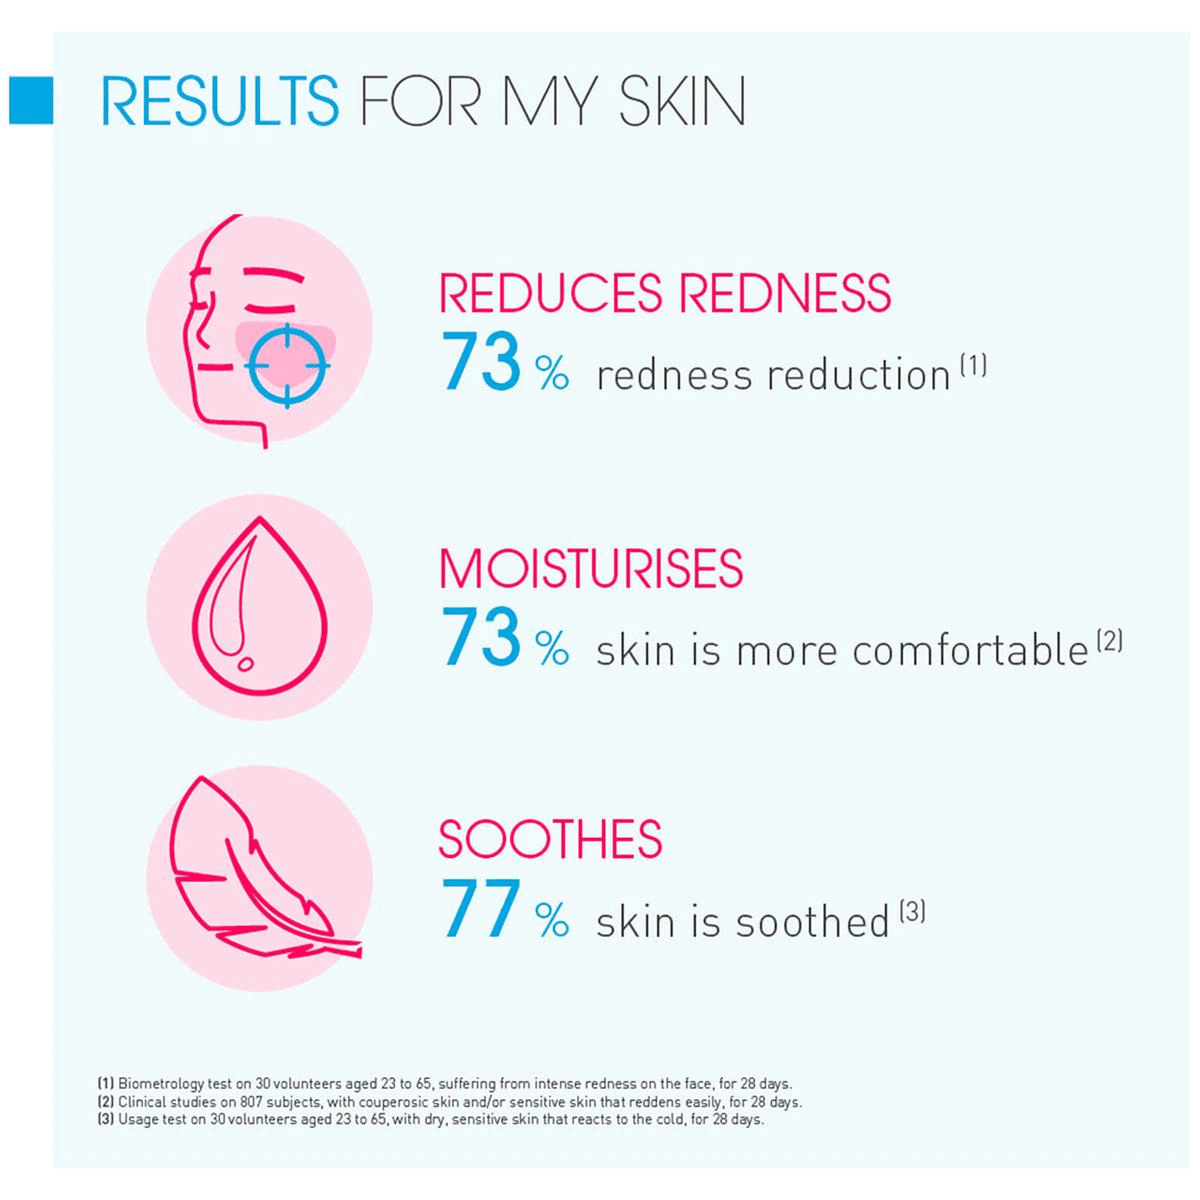 Results for your skin. Your ecobiological routine